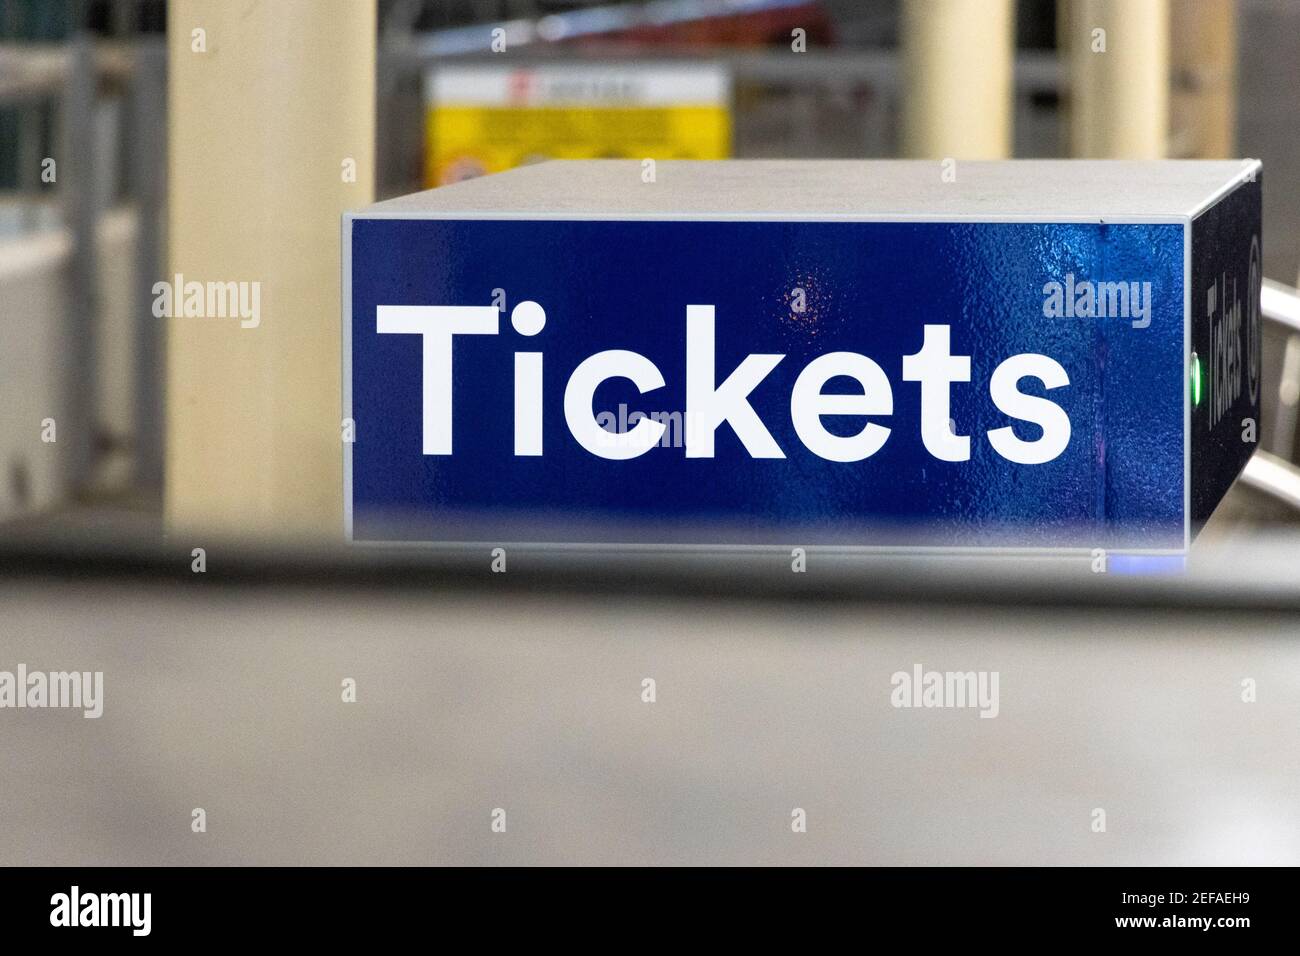 Tickets sign in the central station on the self service ticket kiosk in Kortrijk, Belgium Stock Photo